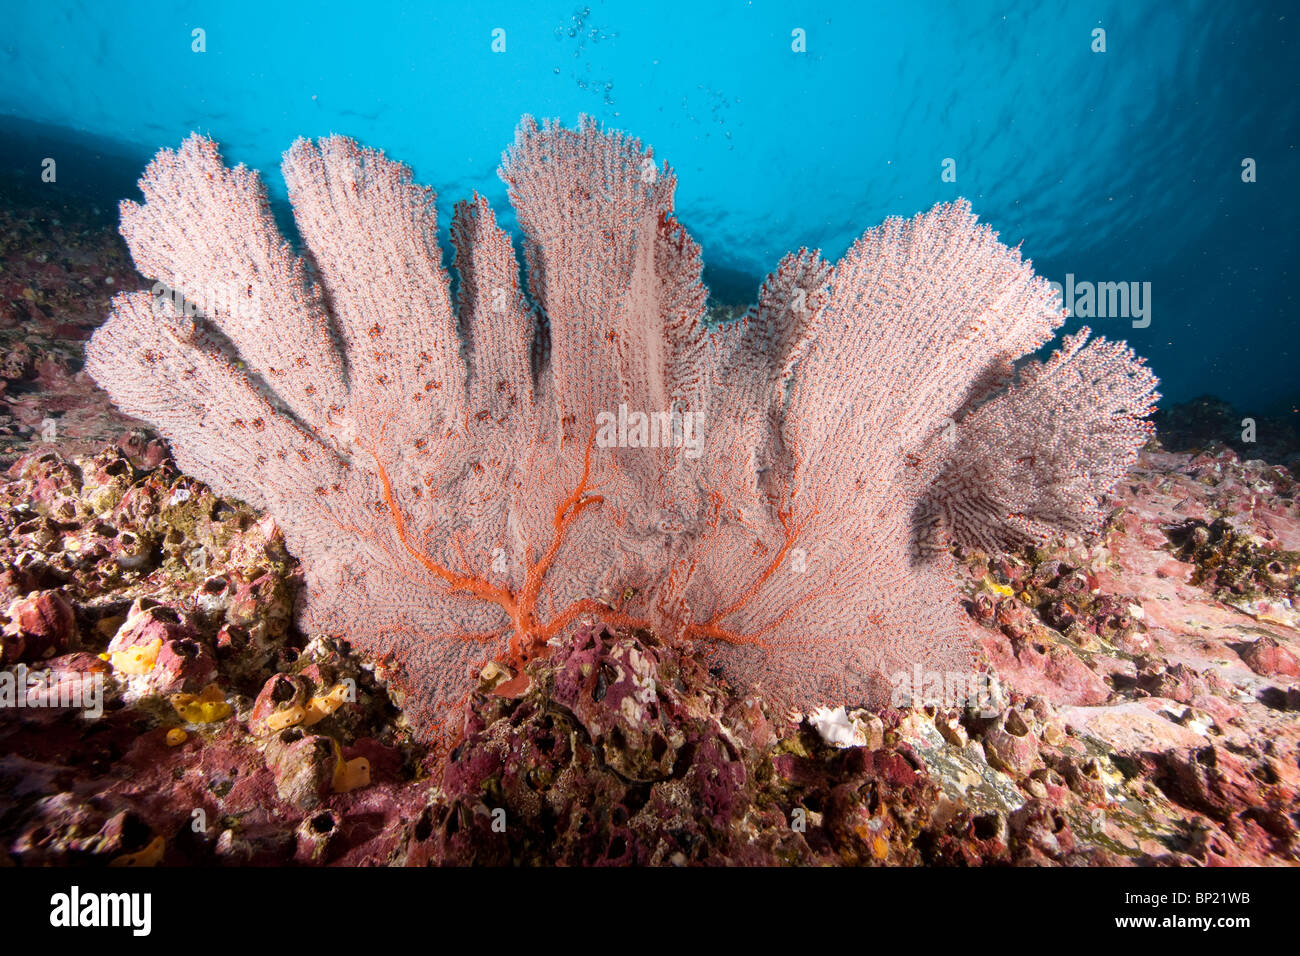 Coral growing at Reef, Malpelo, East Pacific Ocean, Colombia Stock Photo